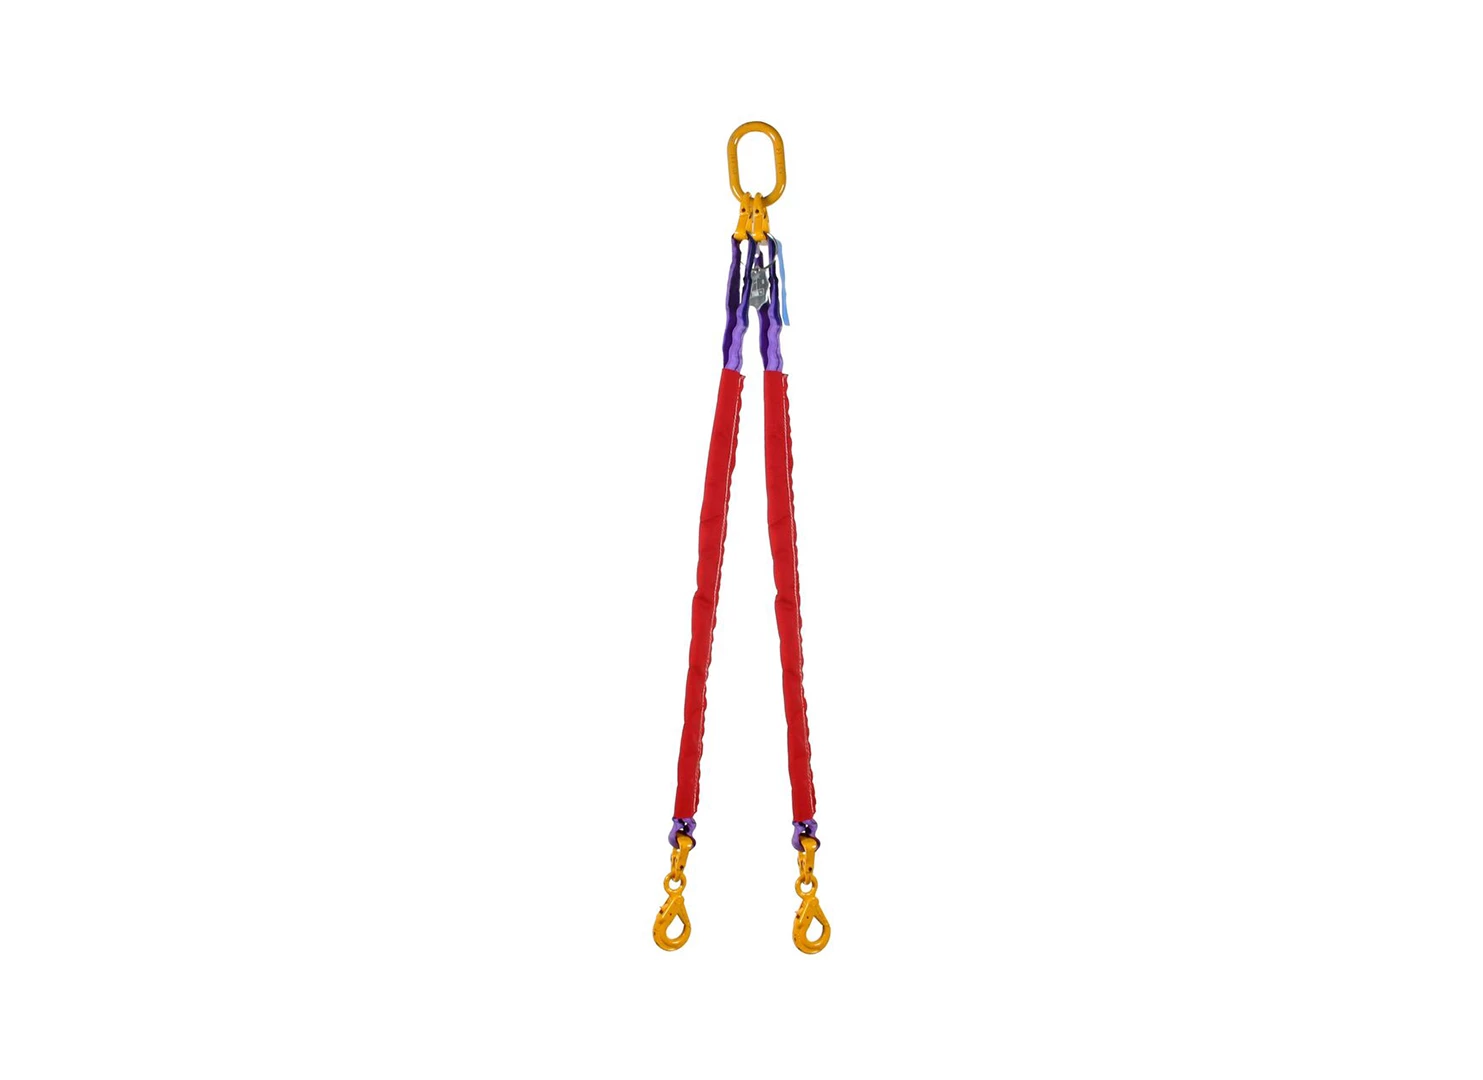 Product: Round slings 2 1.4t*2,3m